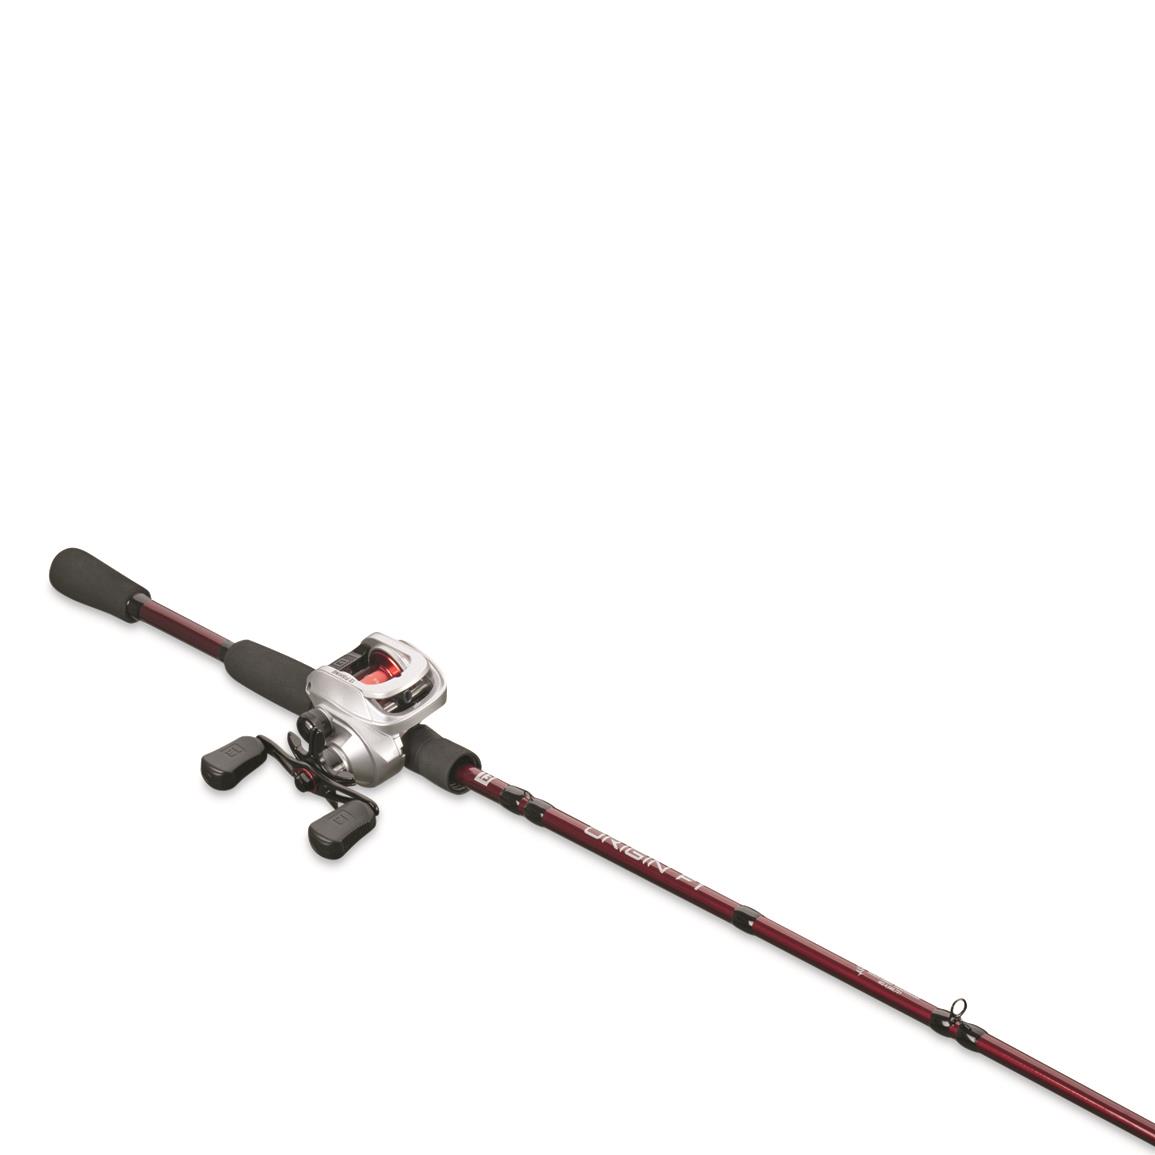 MACH 2 Baitcasting Combos - 732885, Casting Combos at Sportsman's